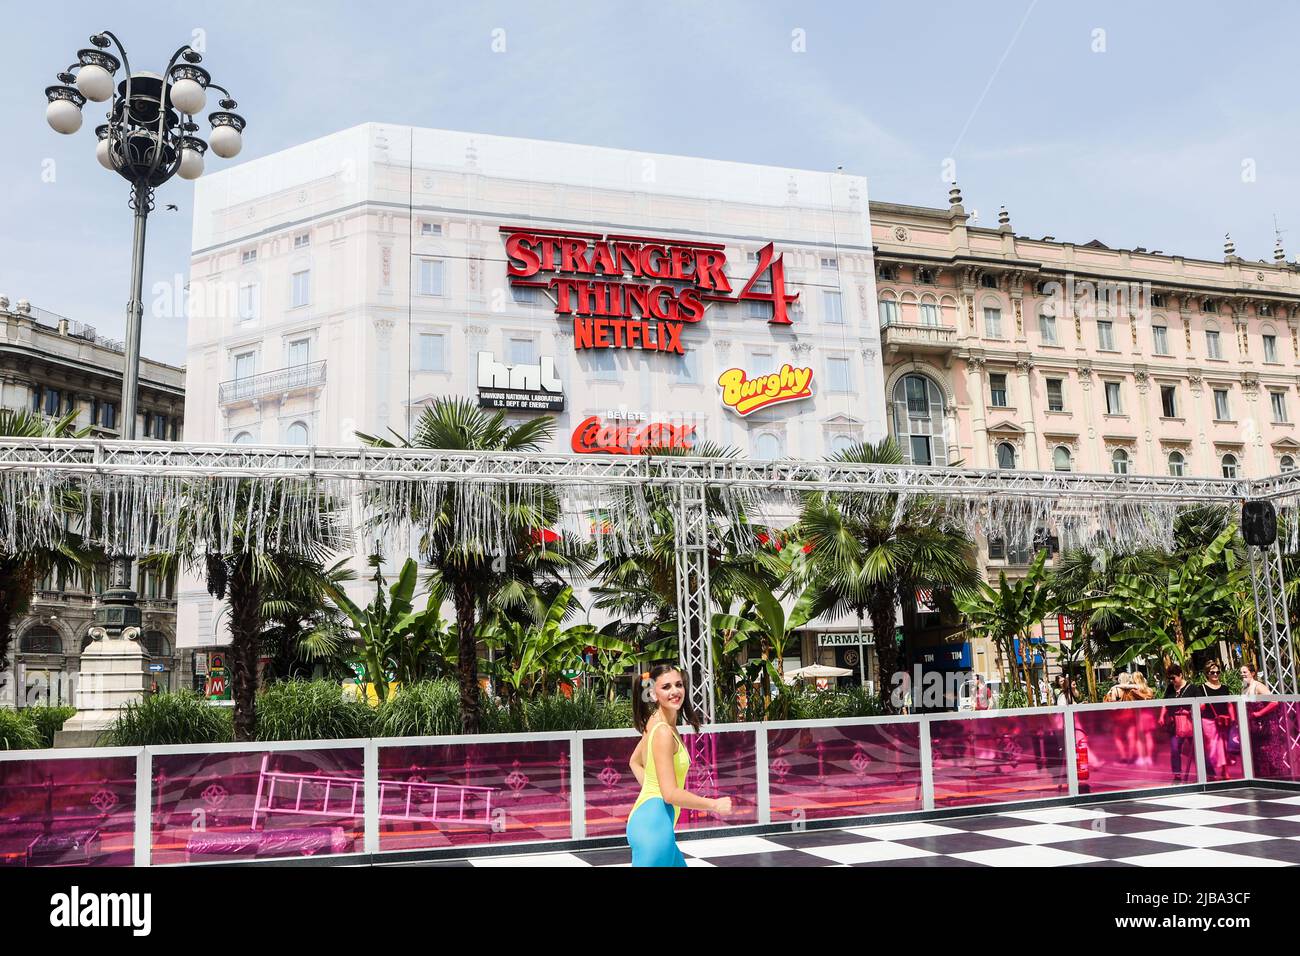 Netflix launch campaign for the release of Stranger Things 4 in Piazza  Duomo, Milano, Italy, on May 27 2022. For the occasion, the centre of Milan  has been decked out with activities